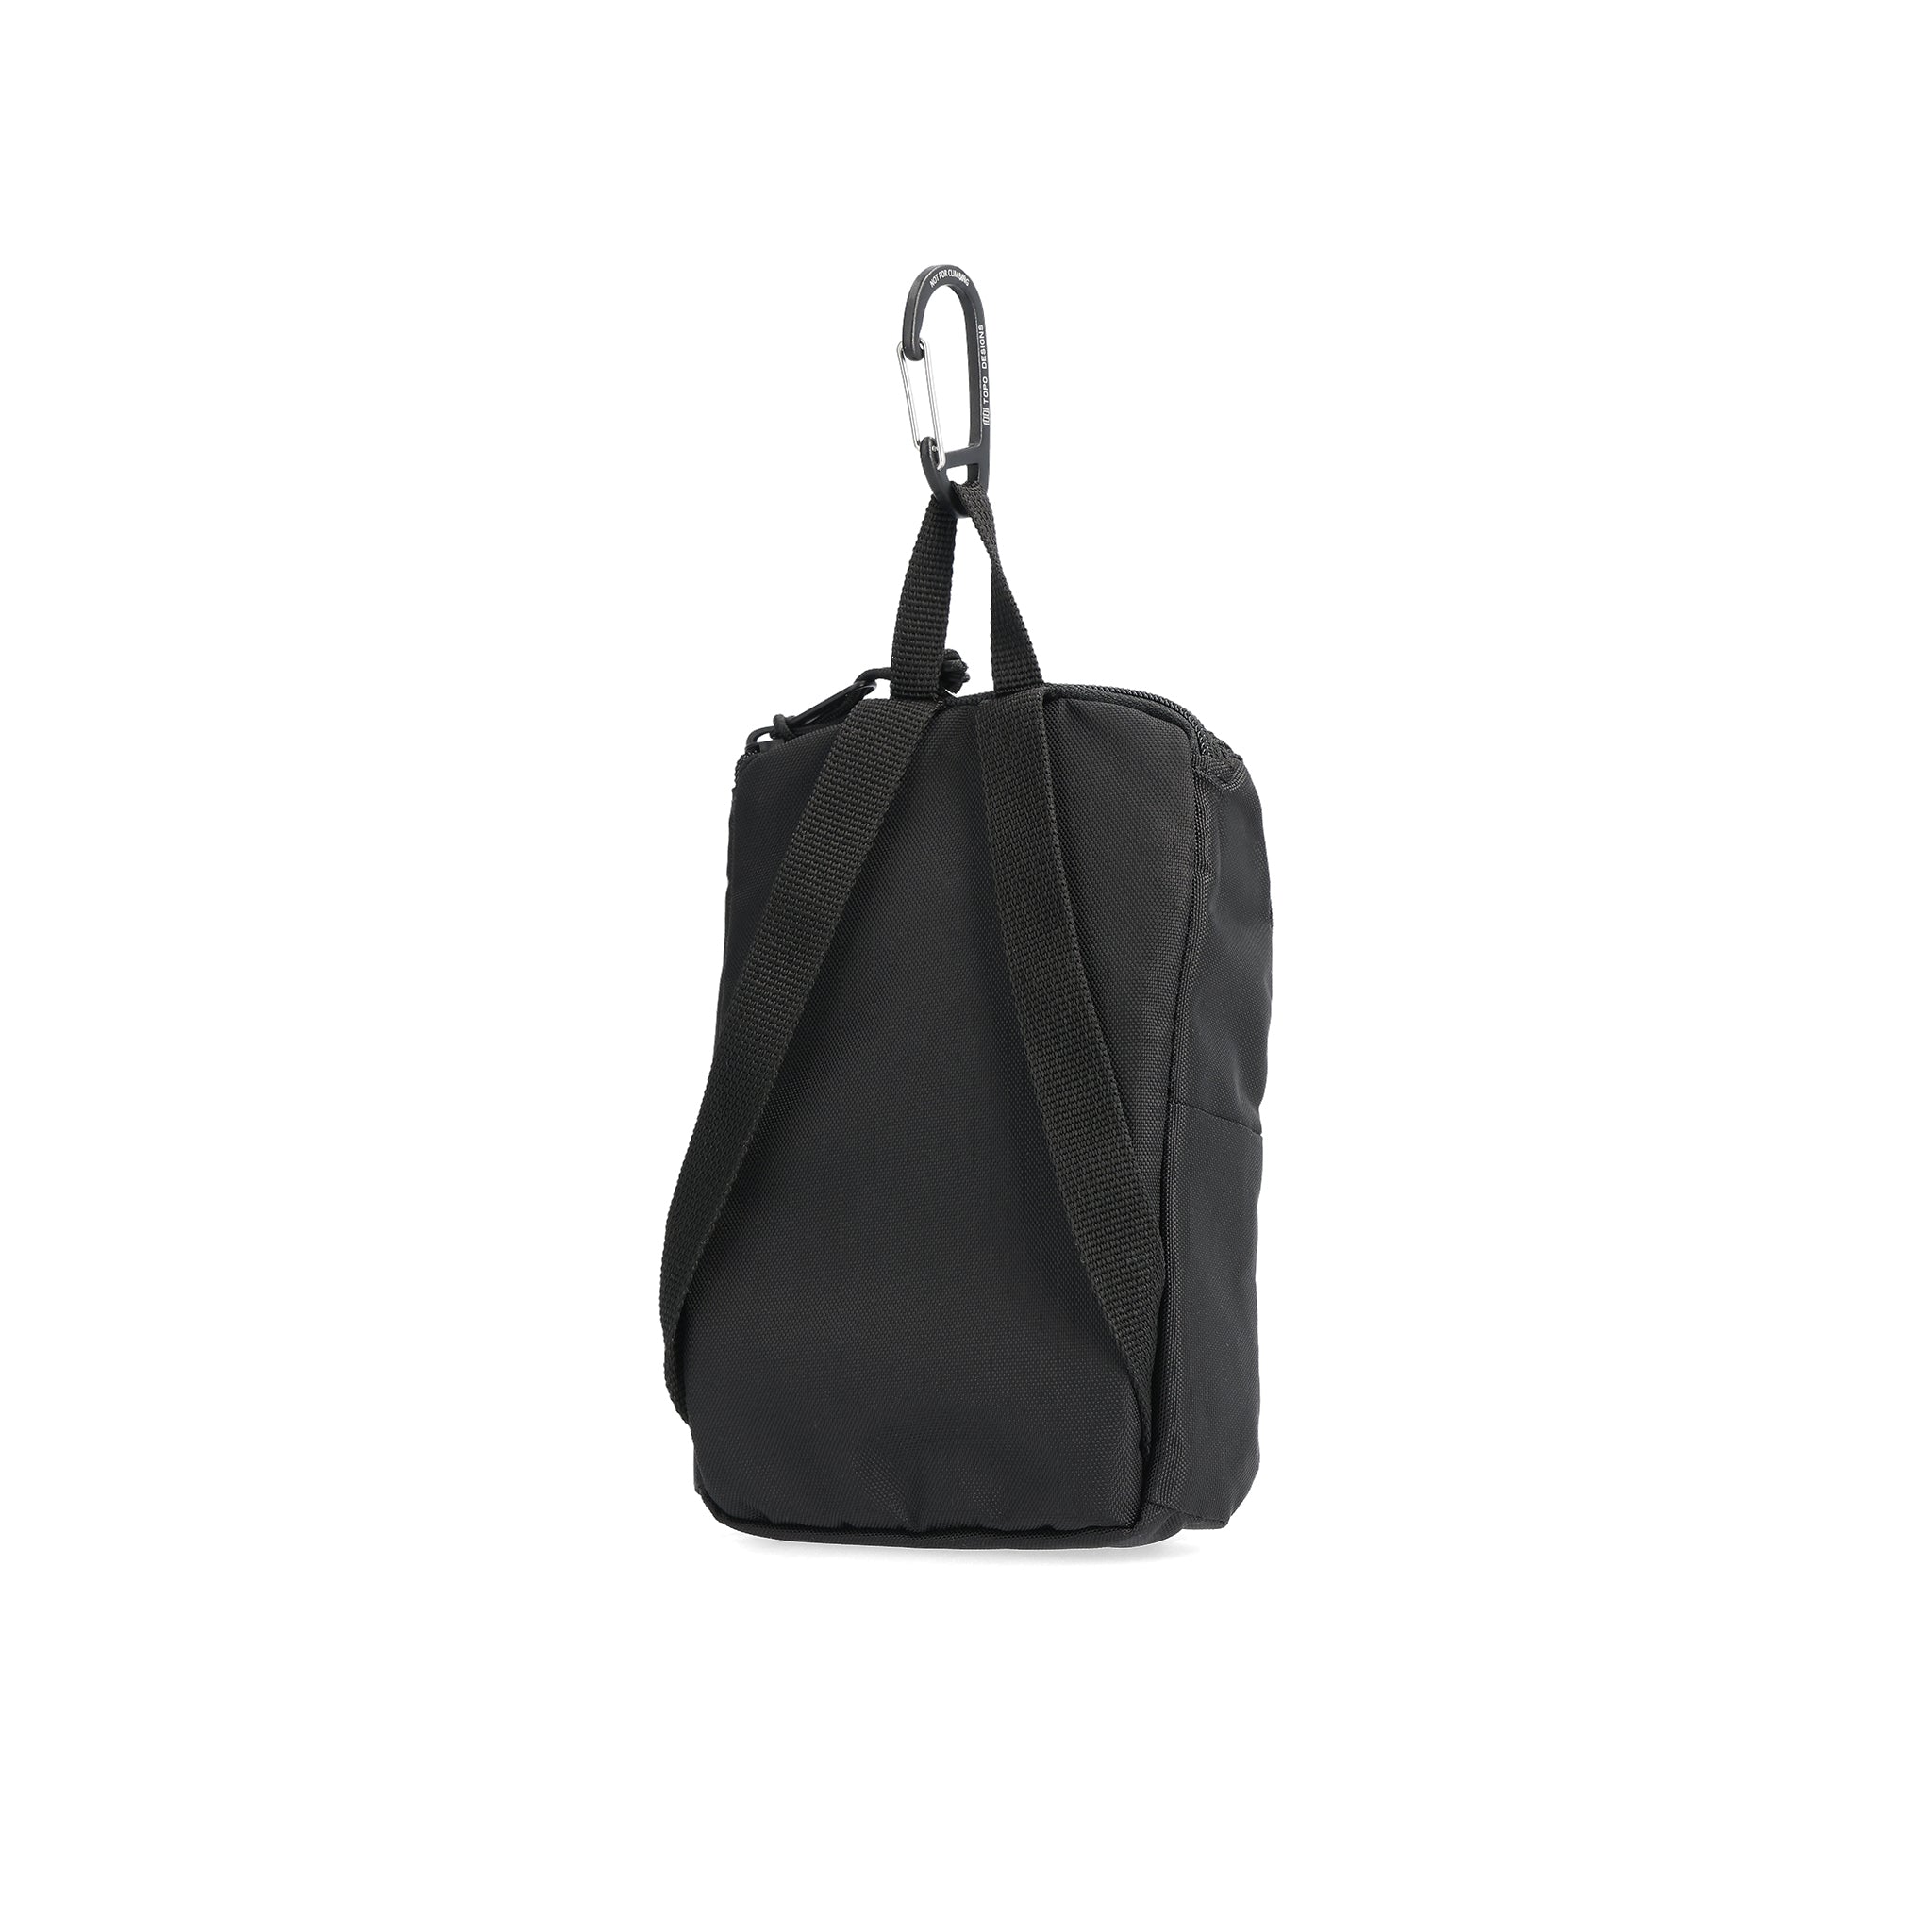 Back View of Topo Designs Rover Pack Micro in "Black"